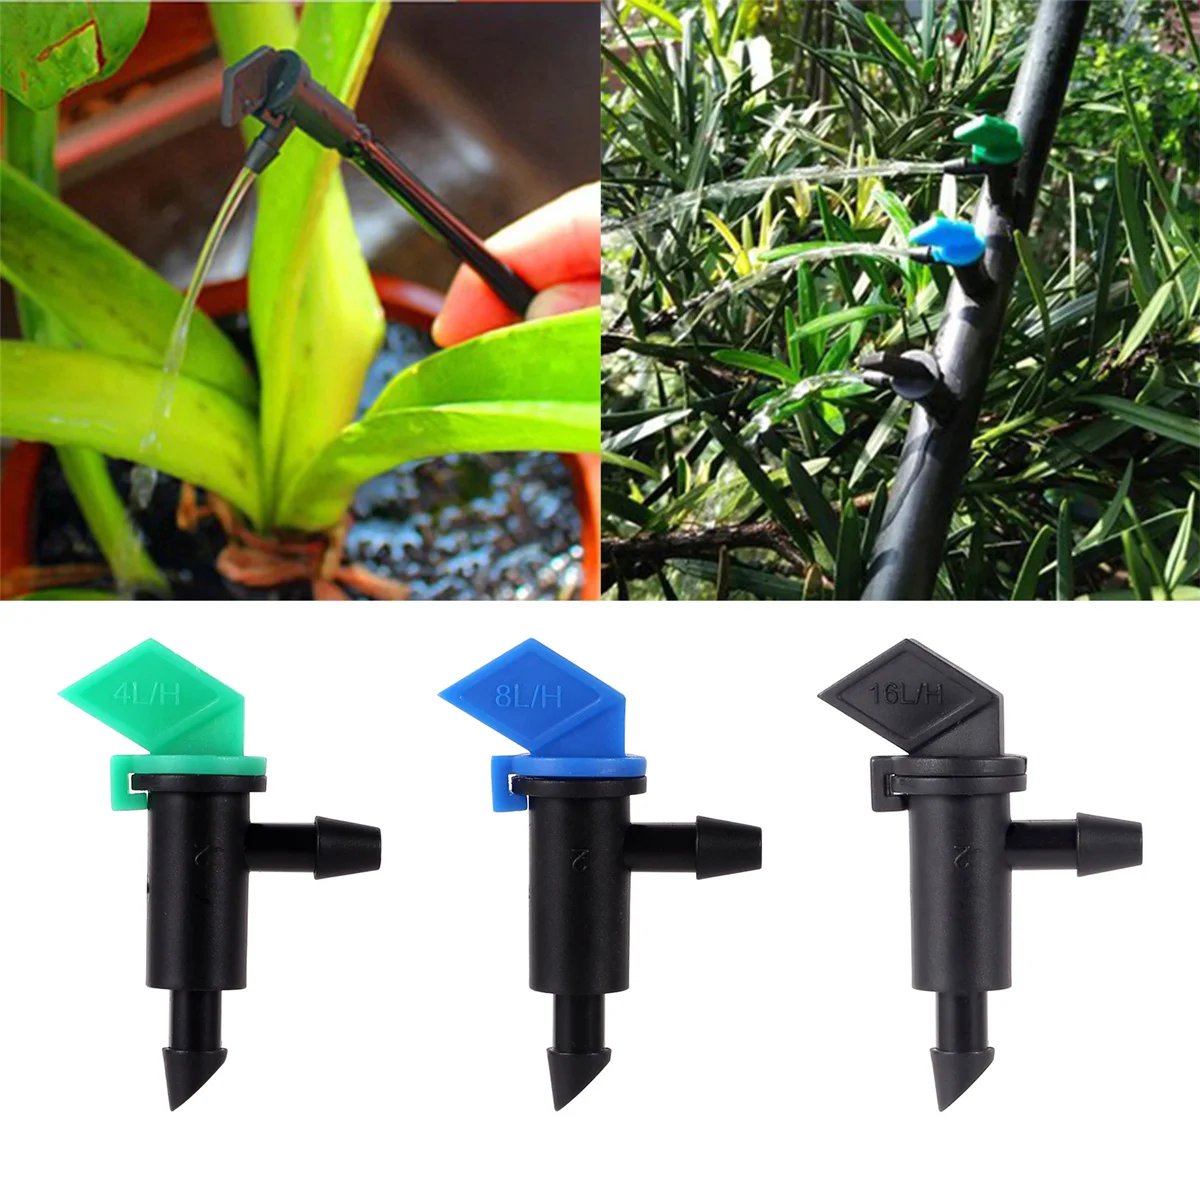 

Irrigation Drip Emitter 4/8/16L/H Flag-shaped Dripper 1/4" Barbed Steady Flow Micro-Sprinkler Garden Lawn Park Watering Fittings